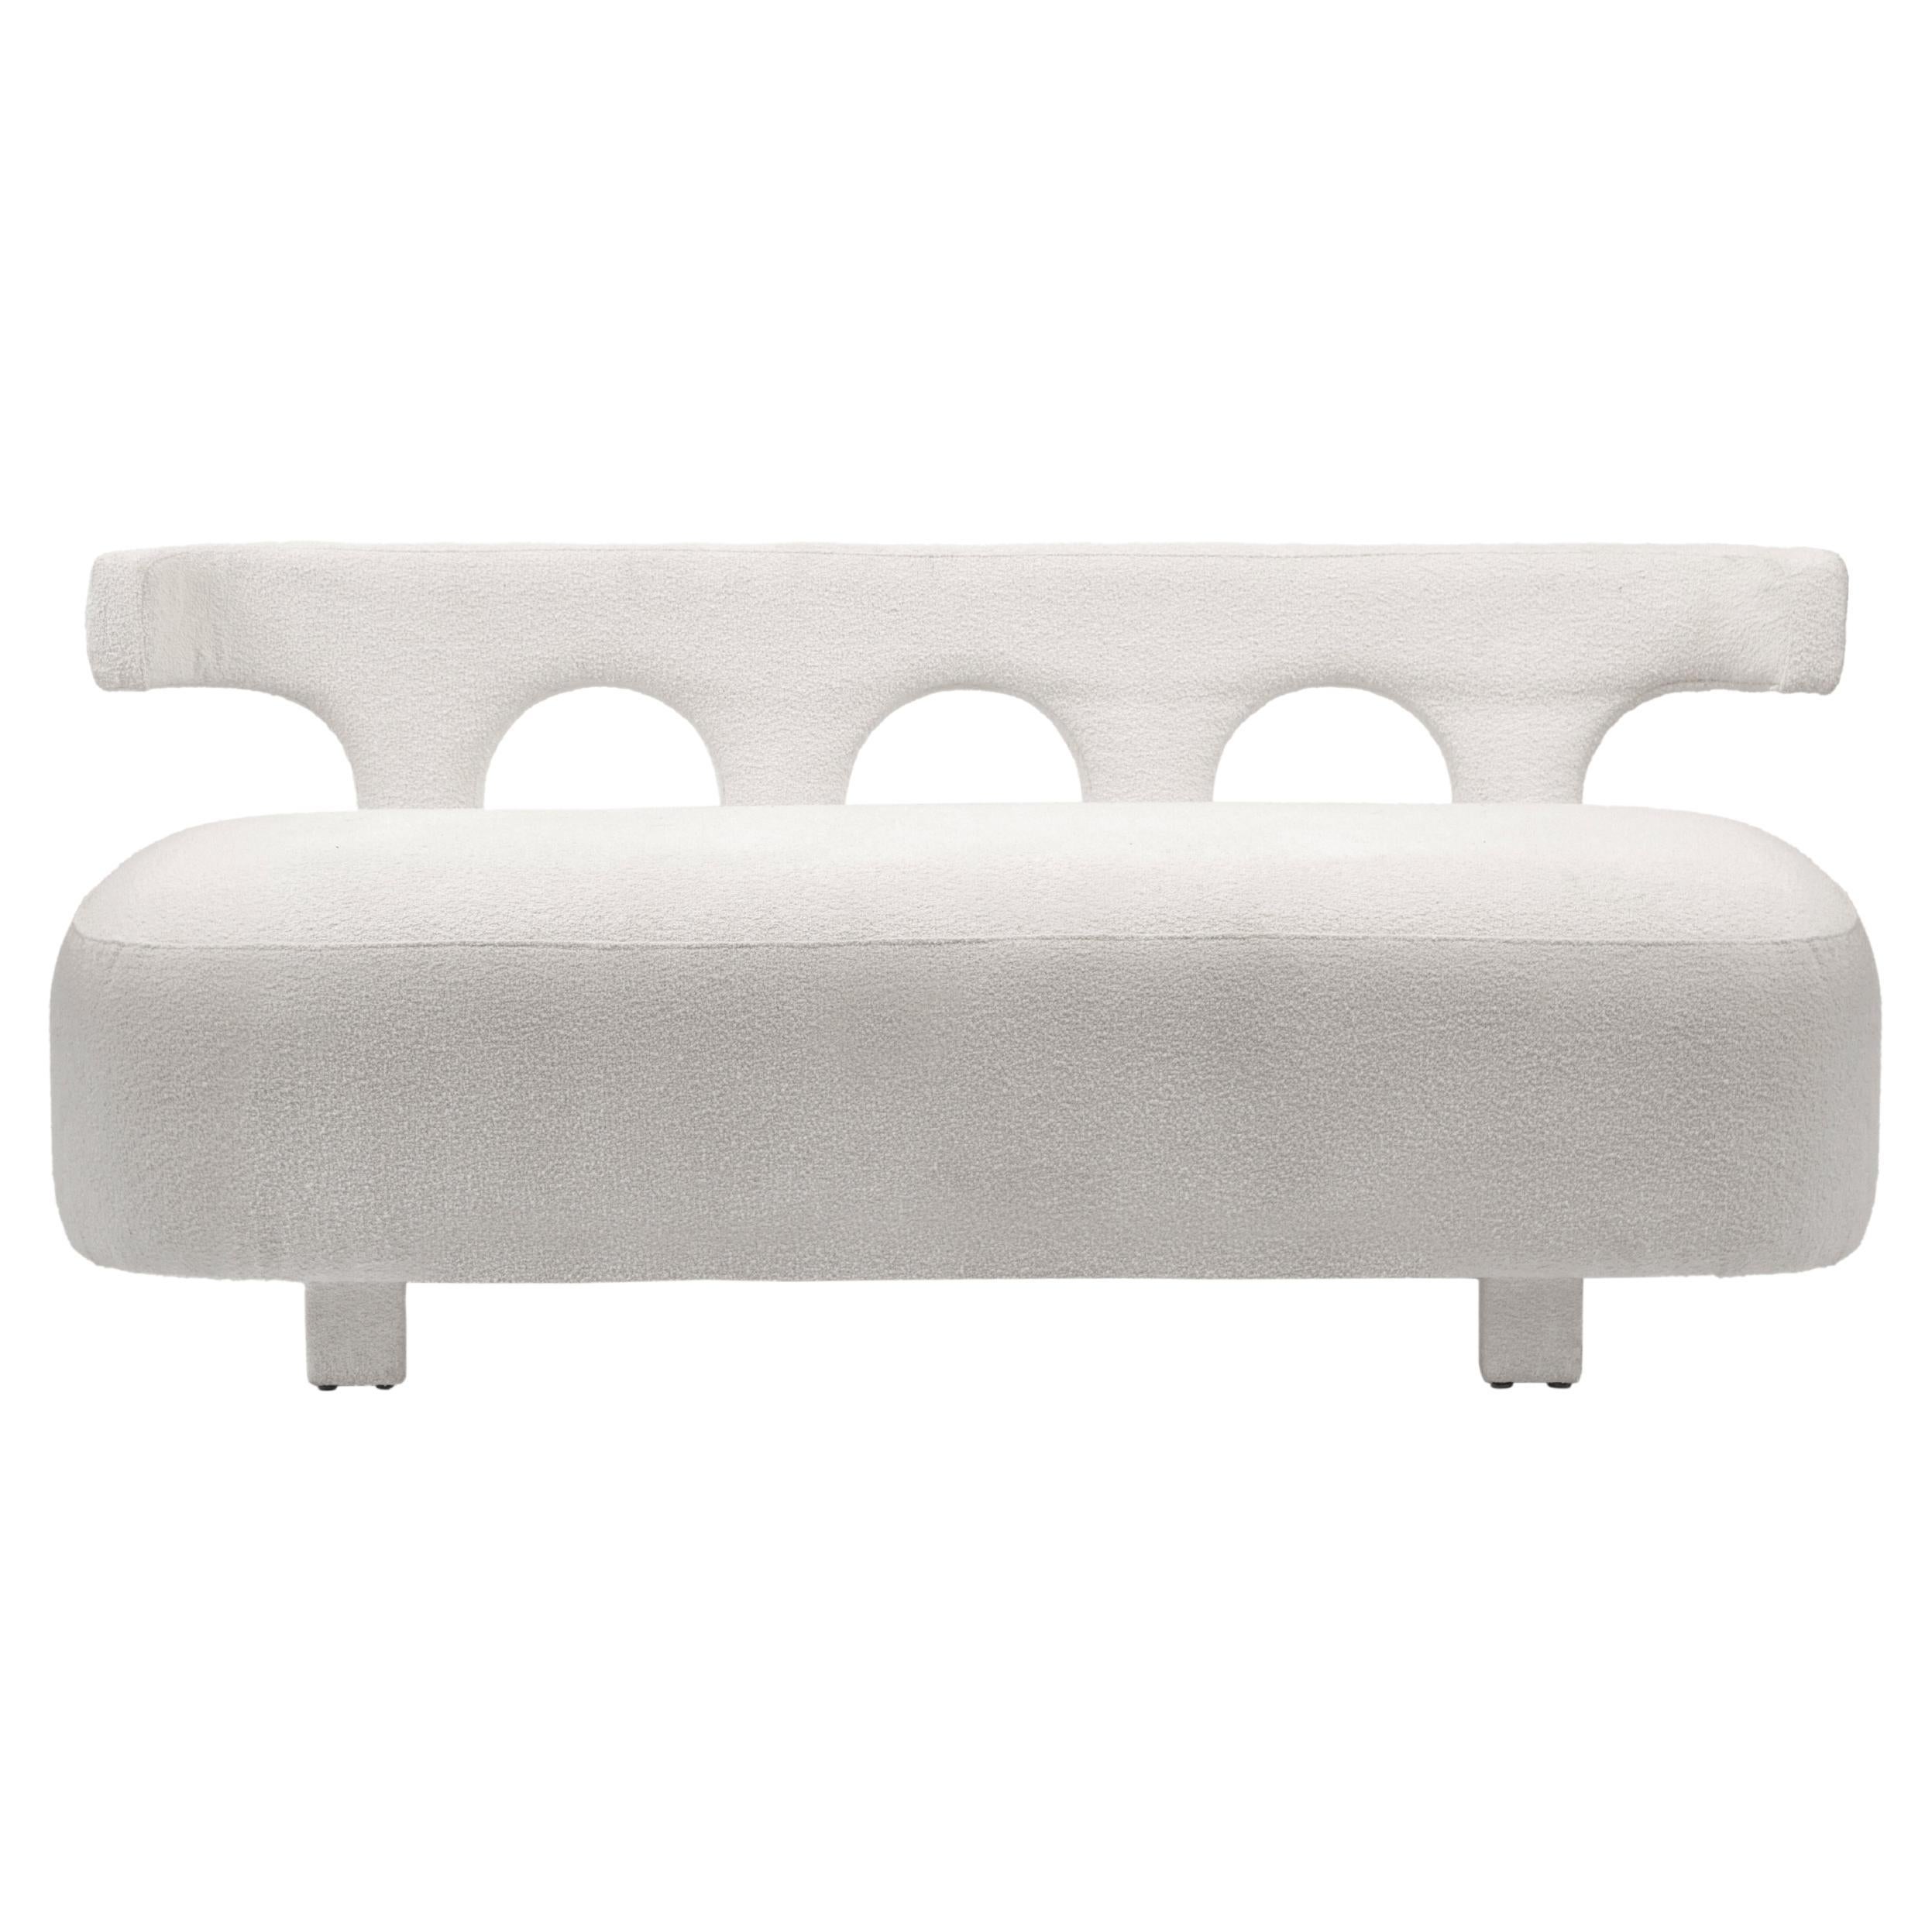 White Curvy Upholstered Sofa Inspired By Egypt's Nubian Architecture